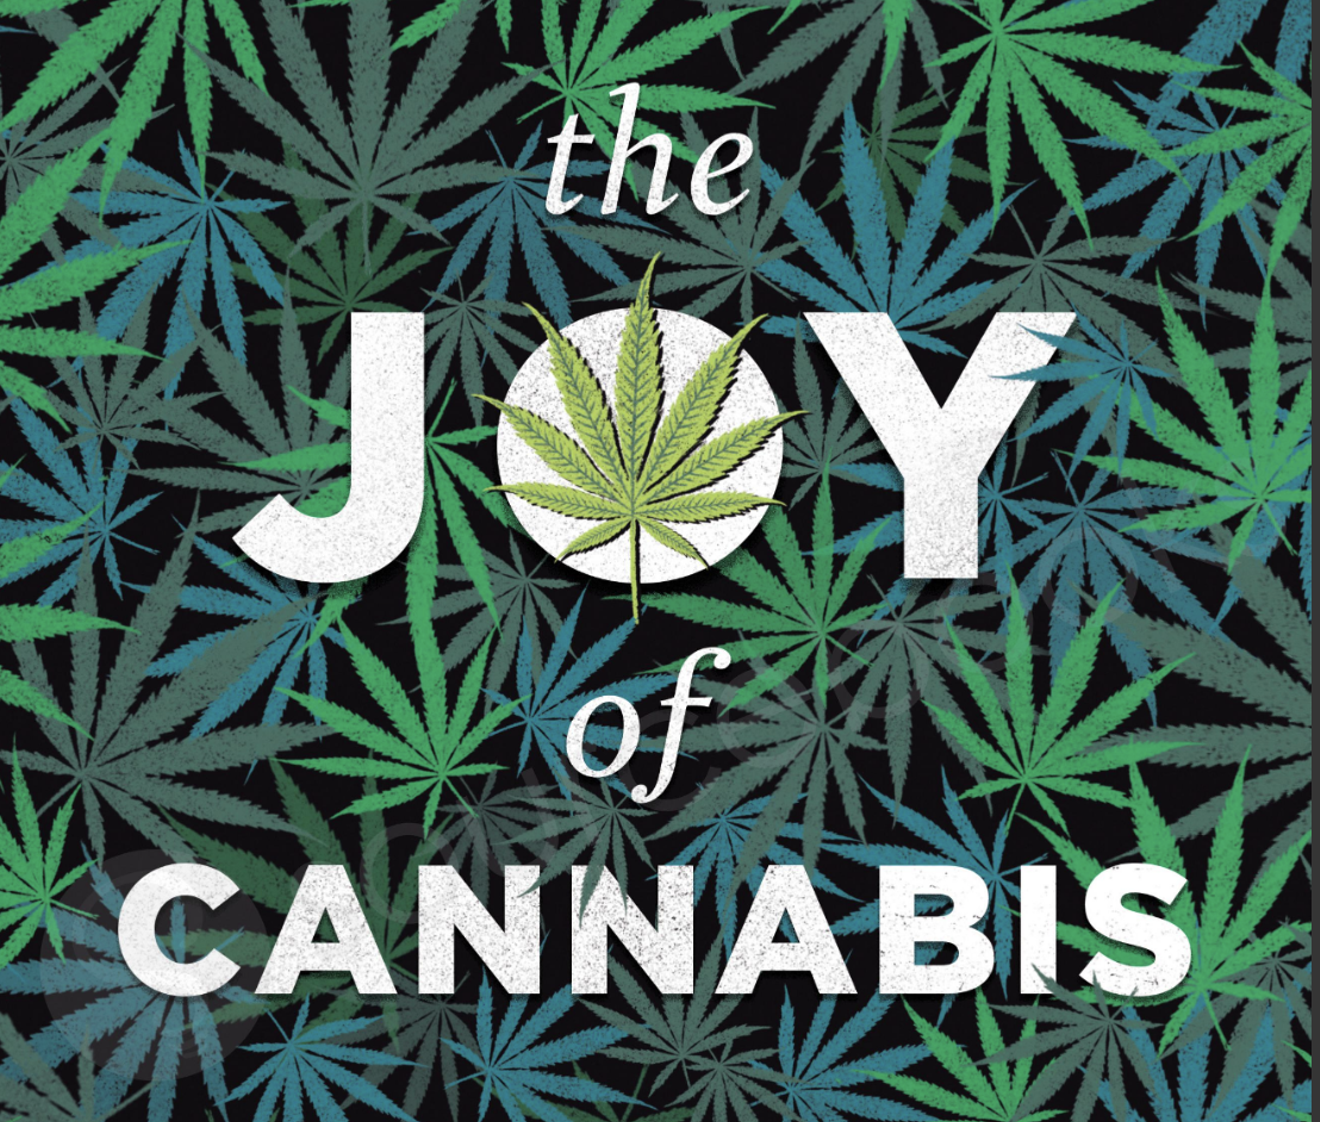 The Joy of Cannabis aims to open minds about recreational and after-work cannabis use.